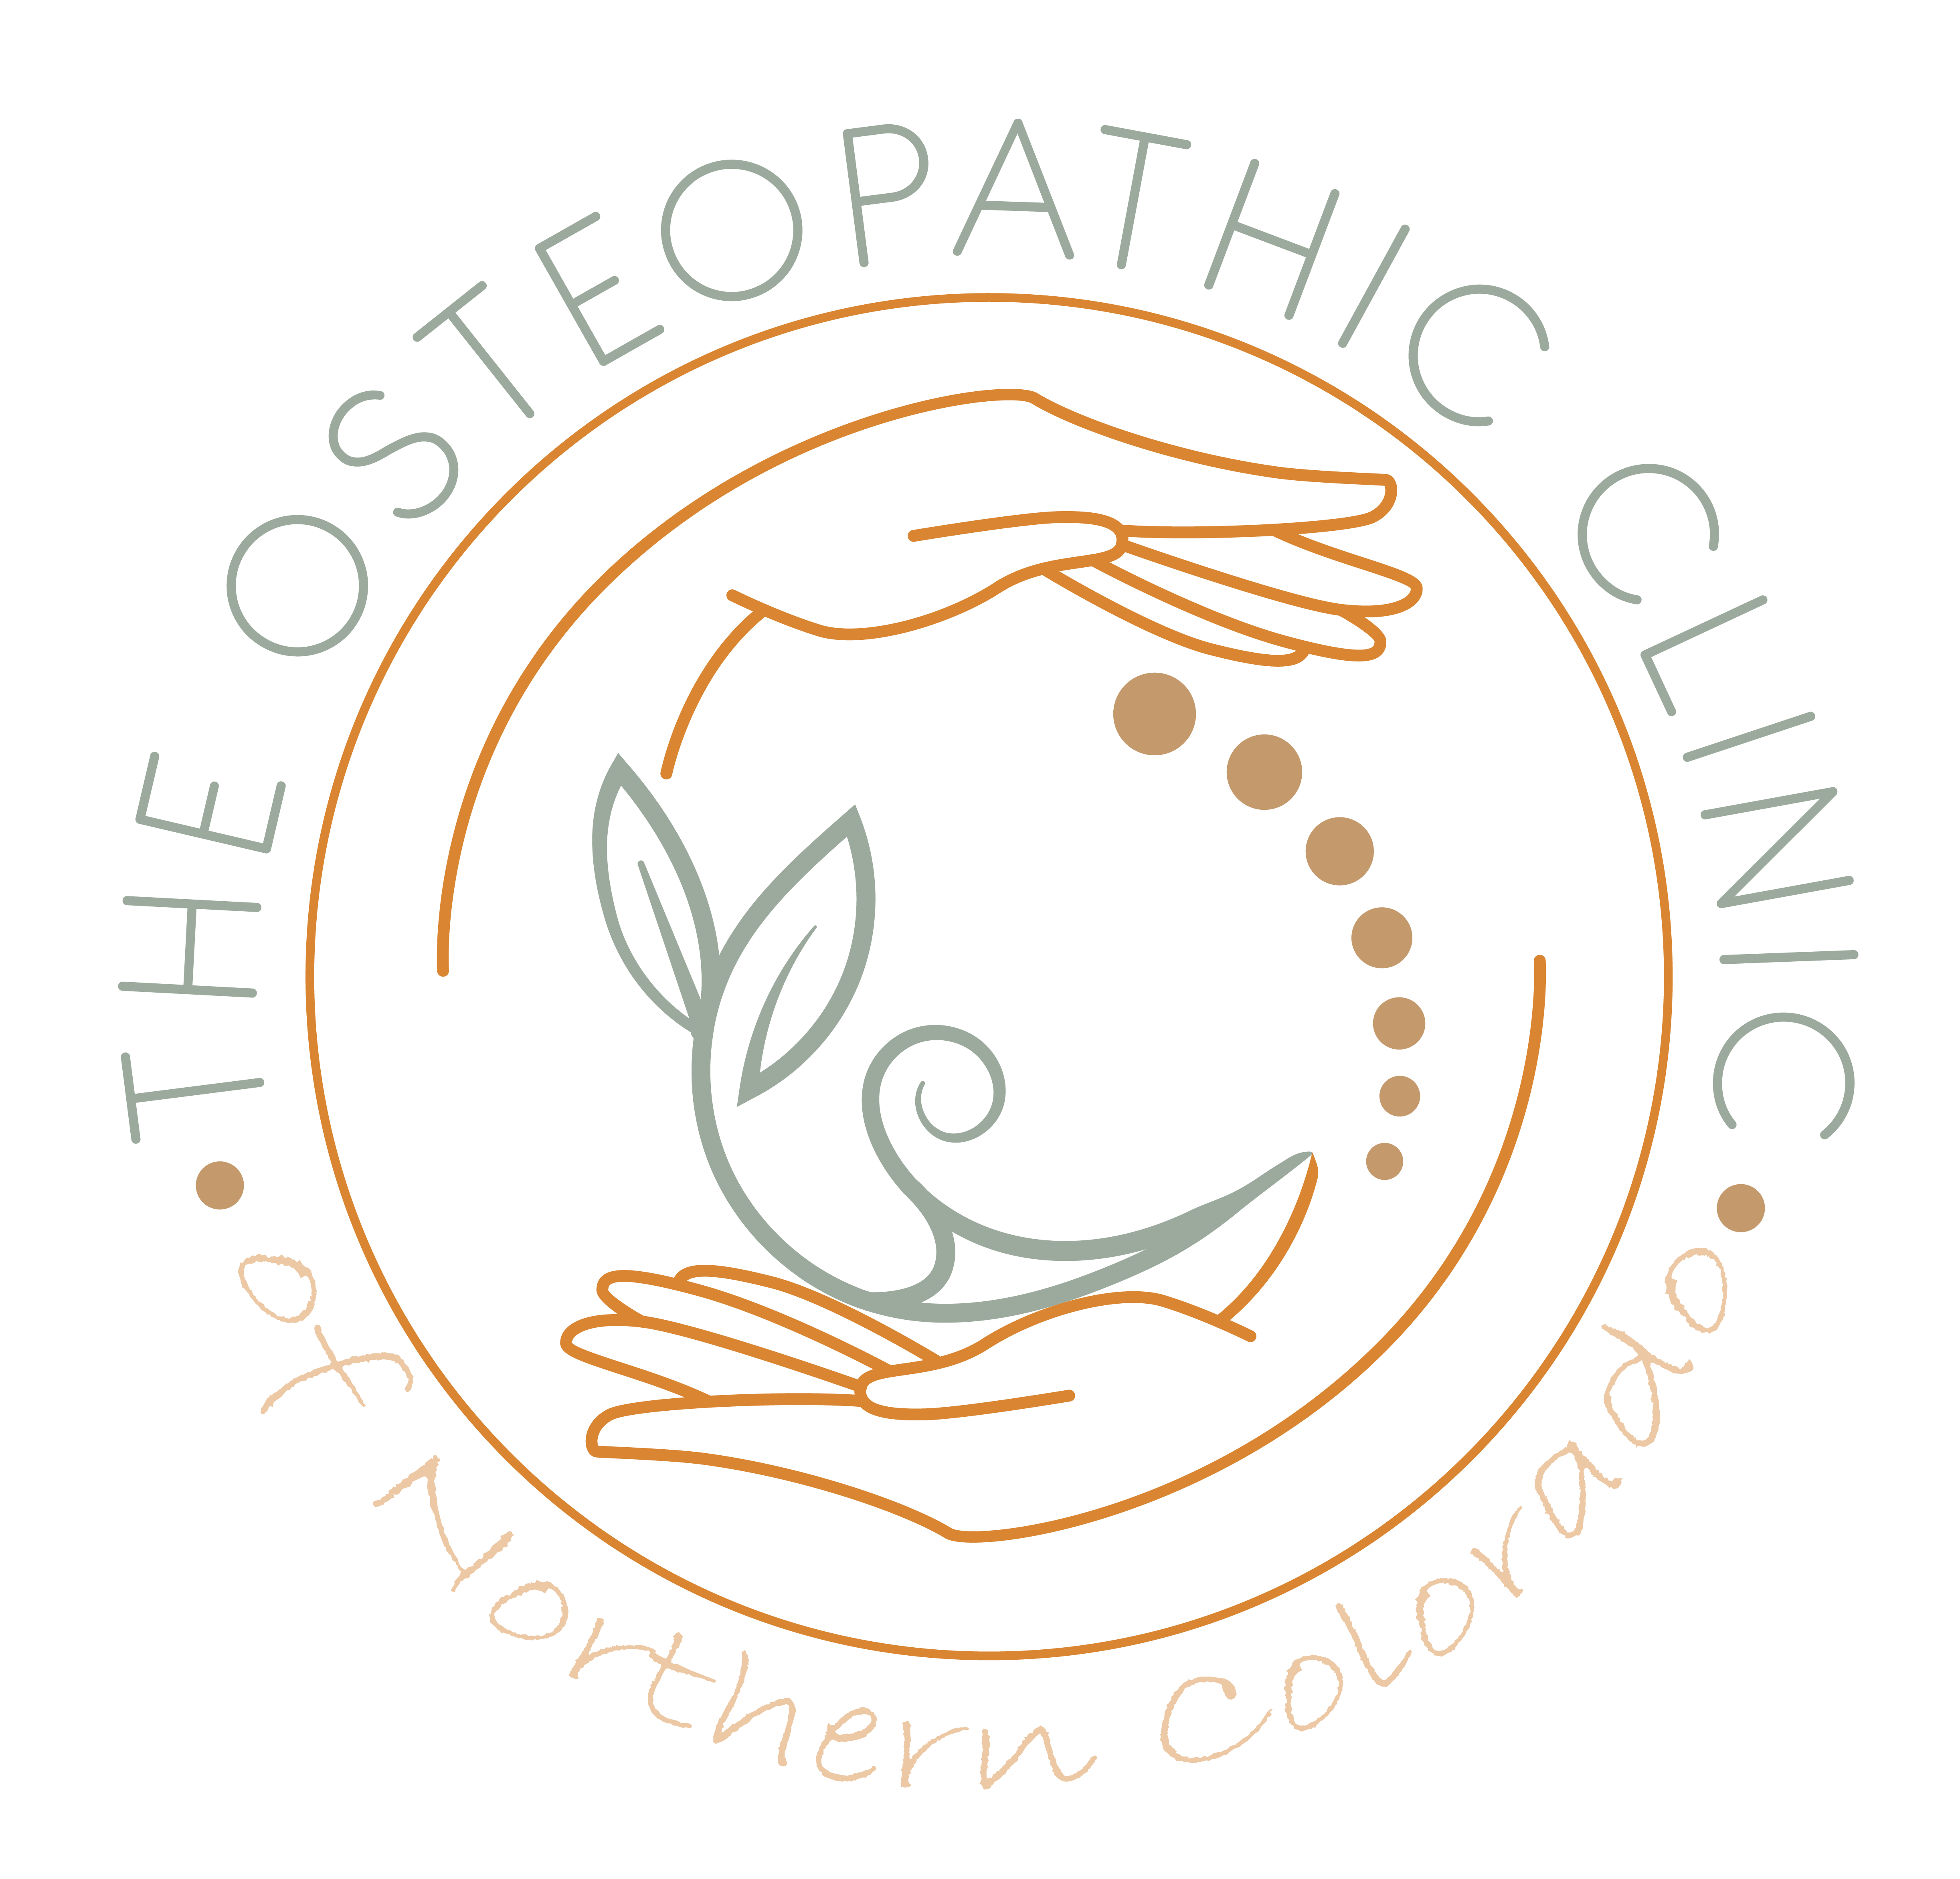 Logo for The Osteopathic Clinic of Norhtern Colorado, circular logo of hands and organic elements in orange and teal.